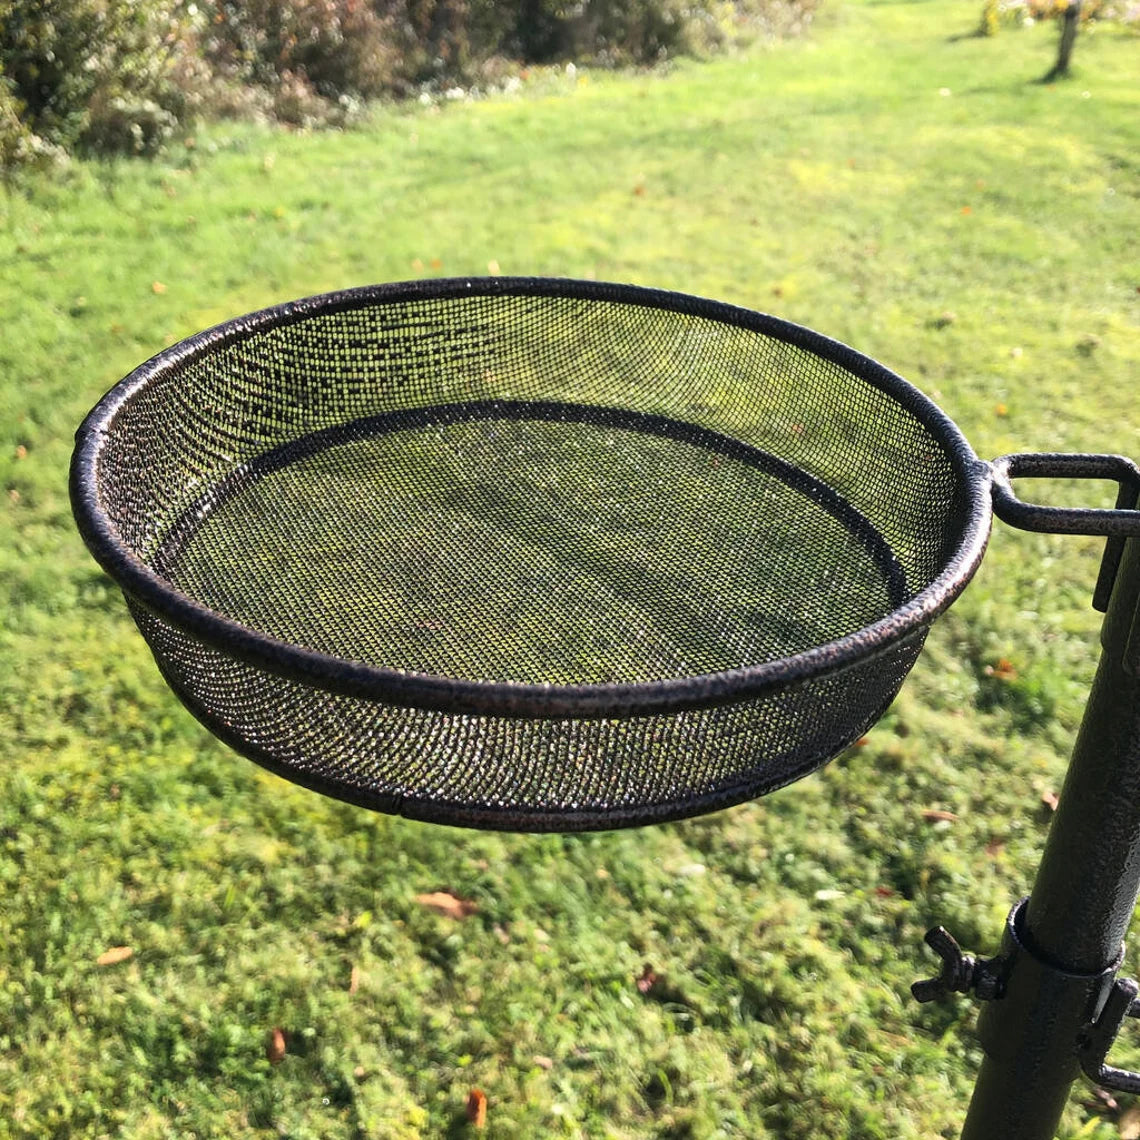 Metal Complete Bird Feeding Station with 4 Feeders with Stabiliser Stand